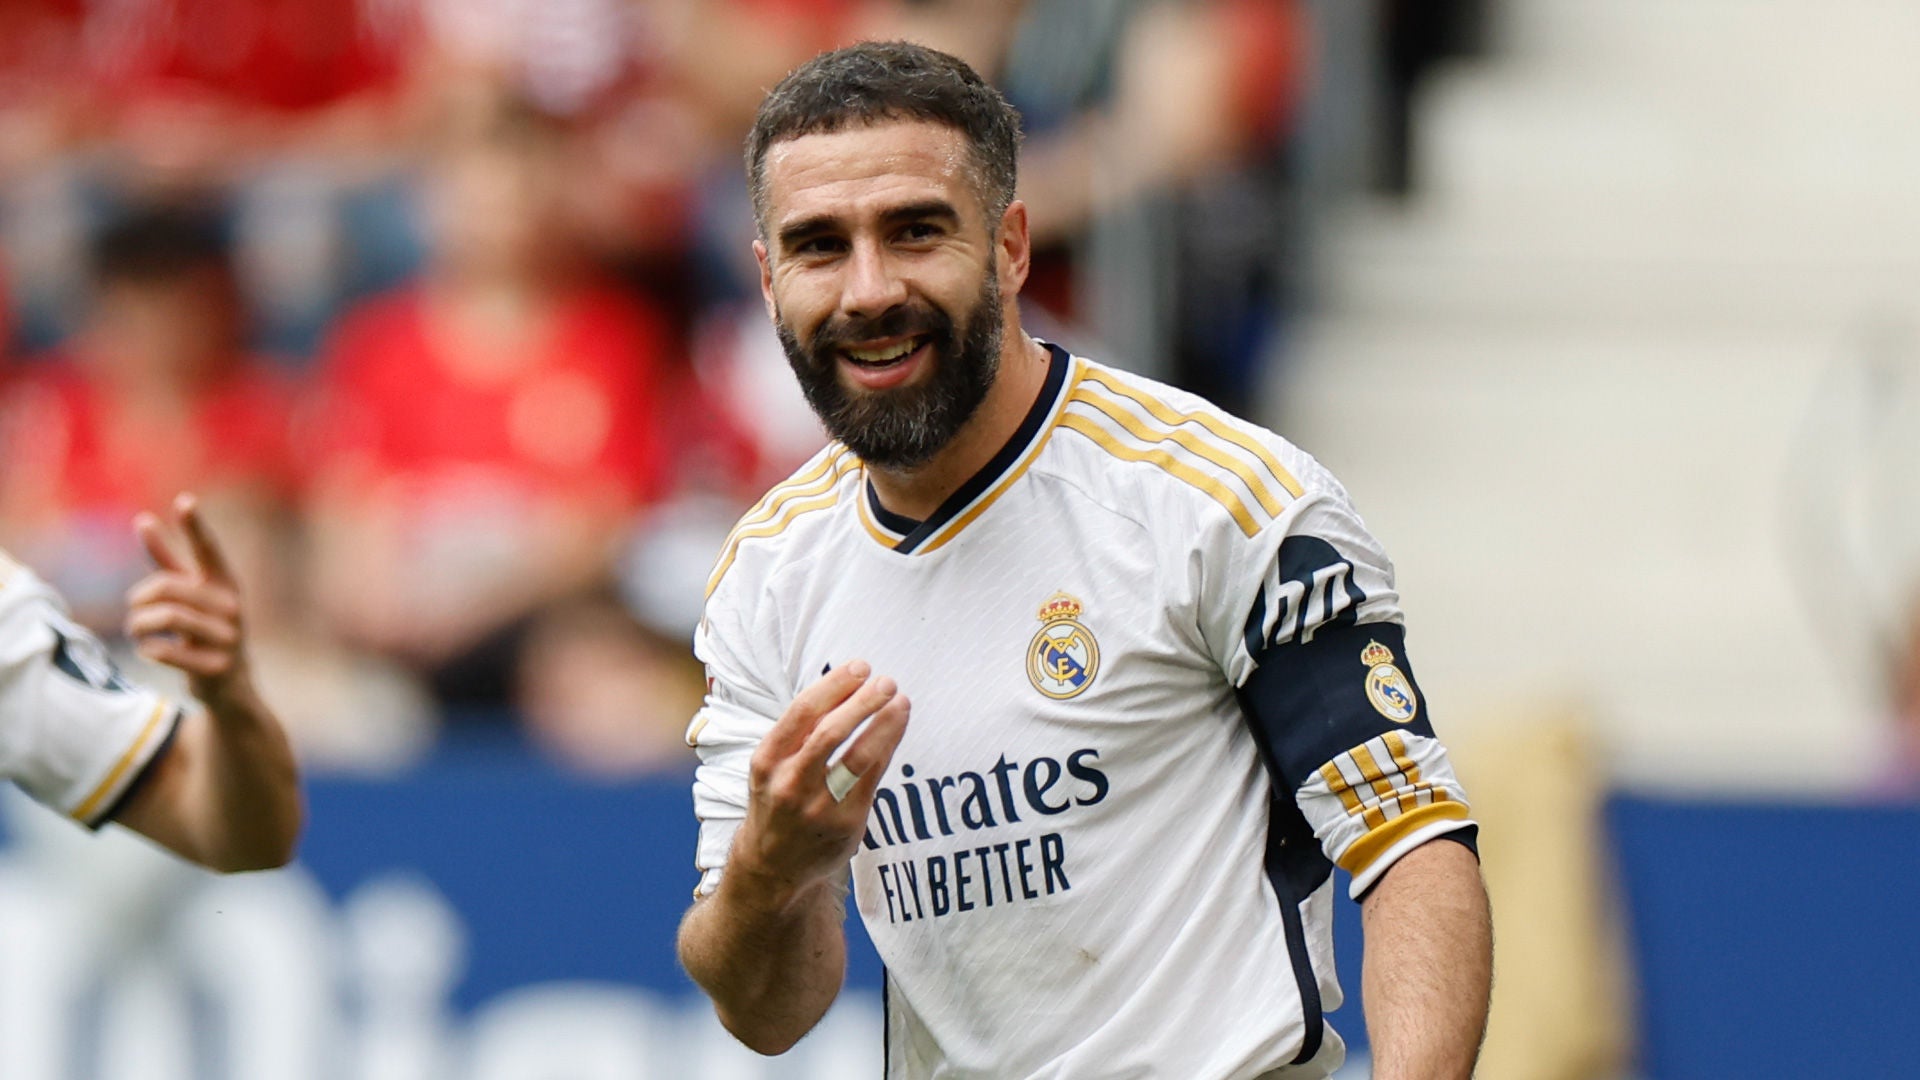 Carvajal: "It's a fundamental win before our international matches"